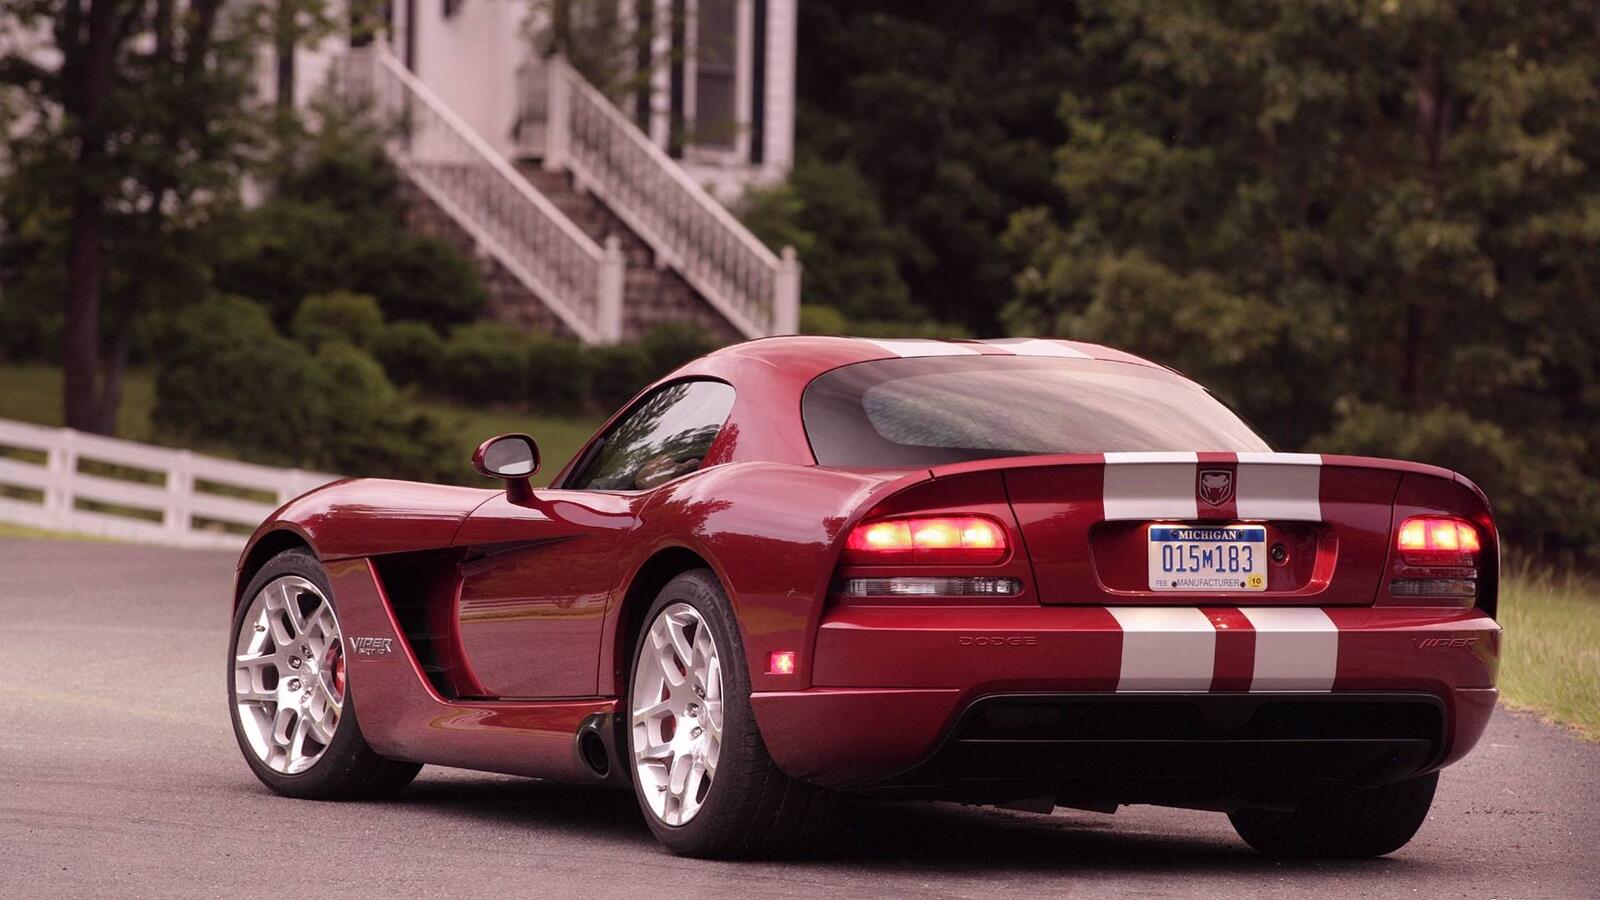 Wallpapers dodge viper sports car cherry on the desktop